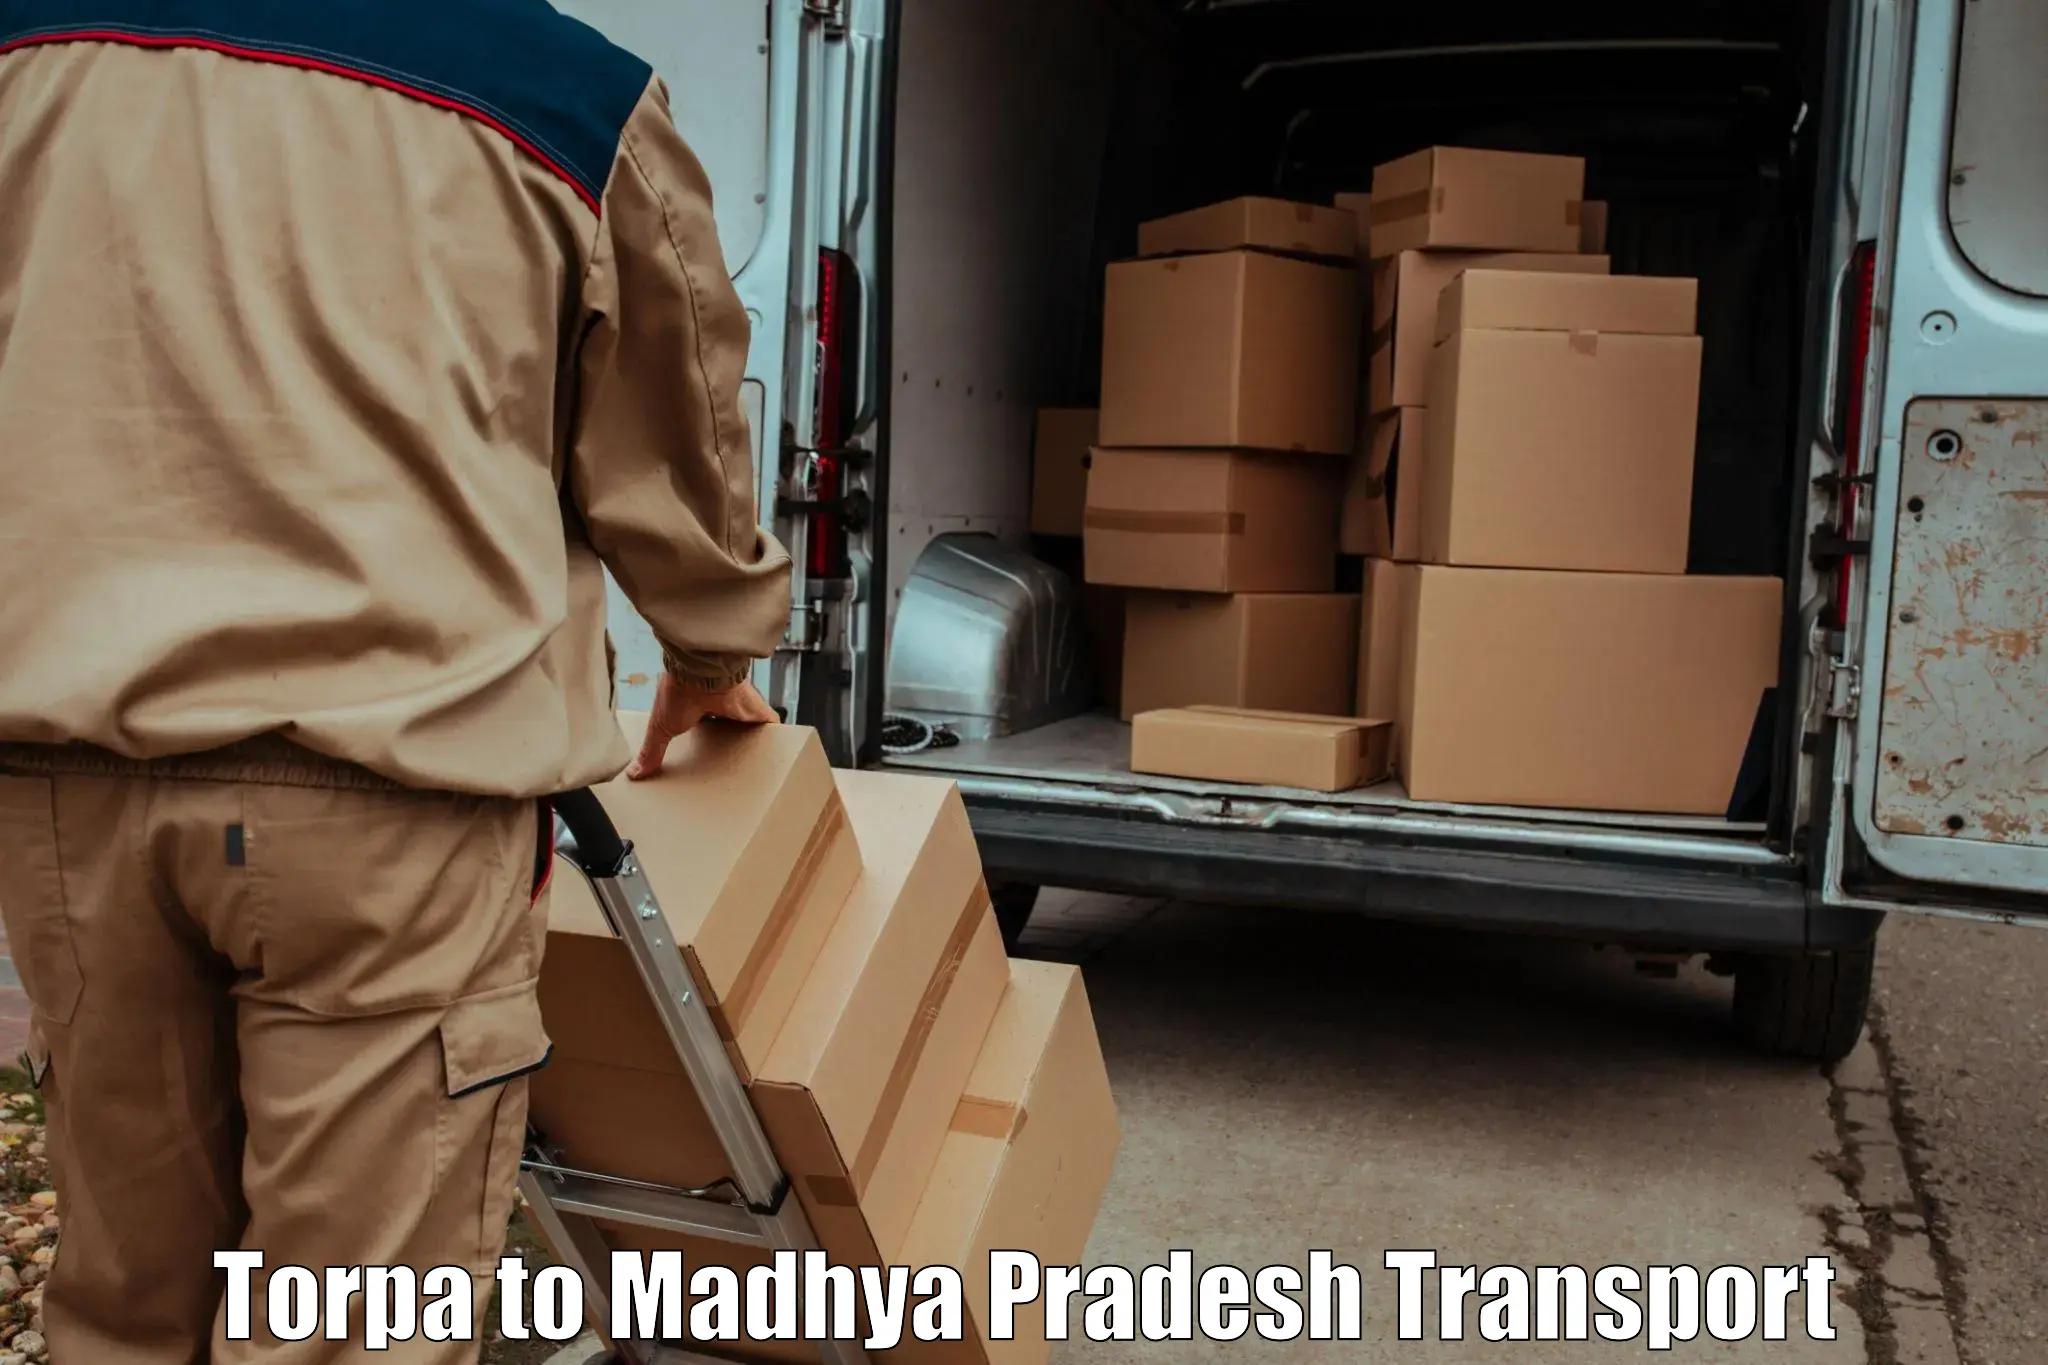 Truck transport companies in India Torpa to Khategaon